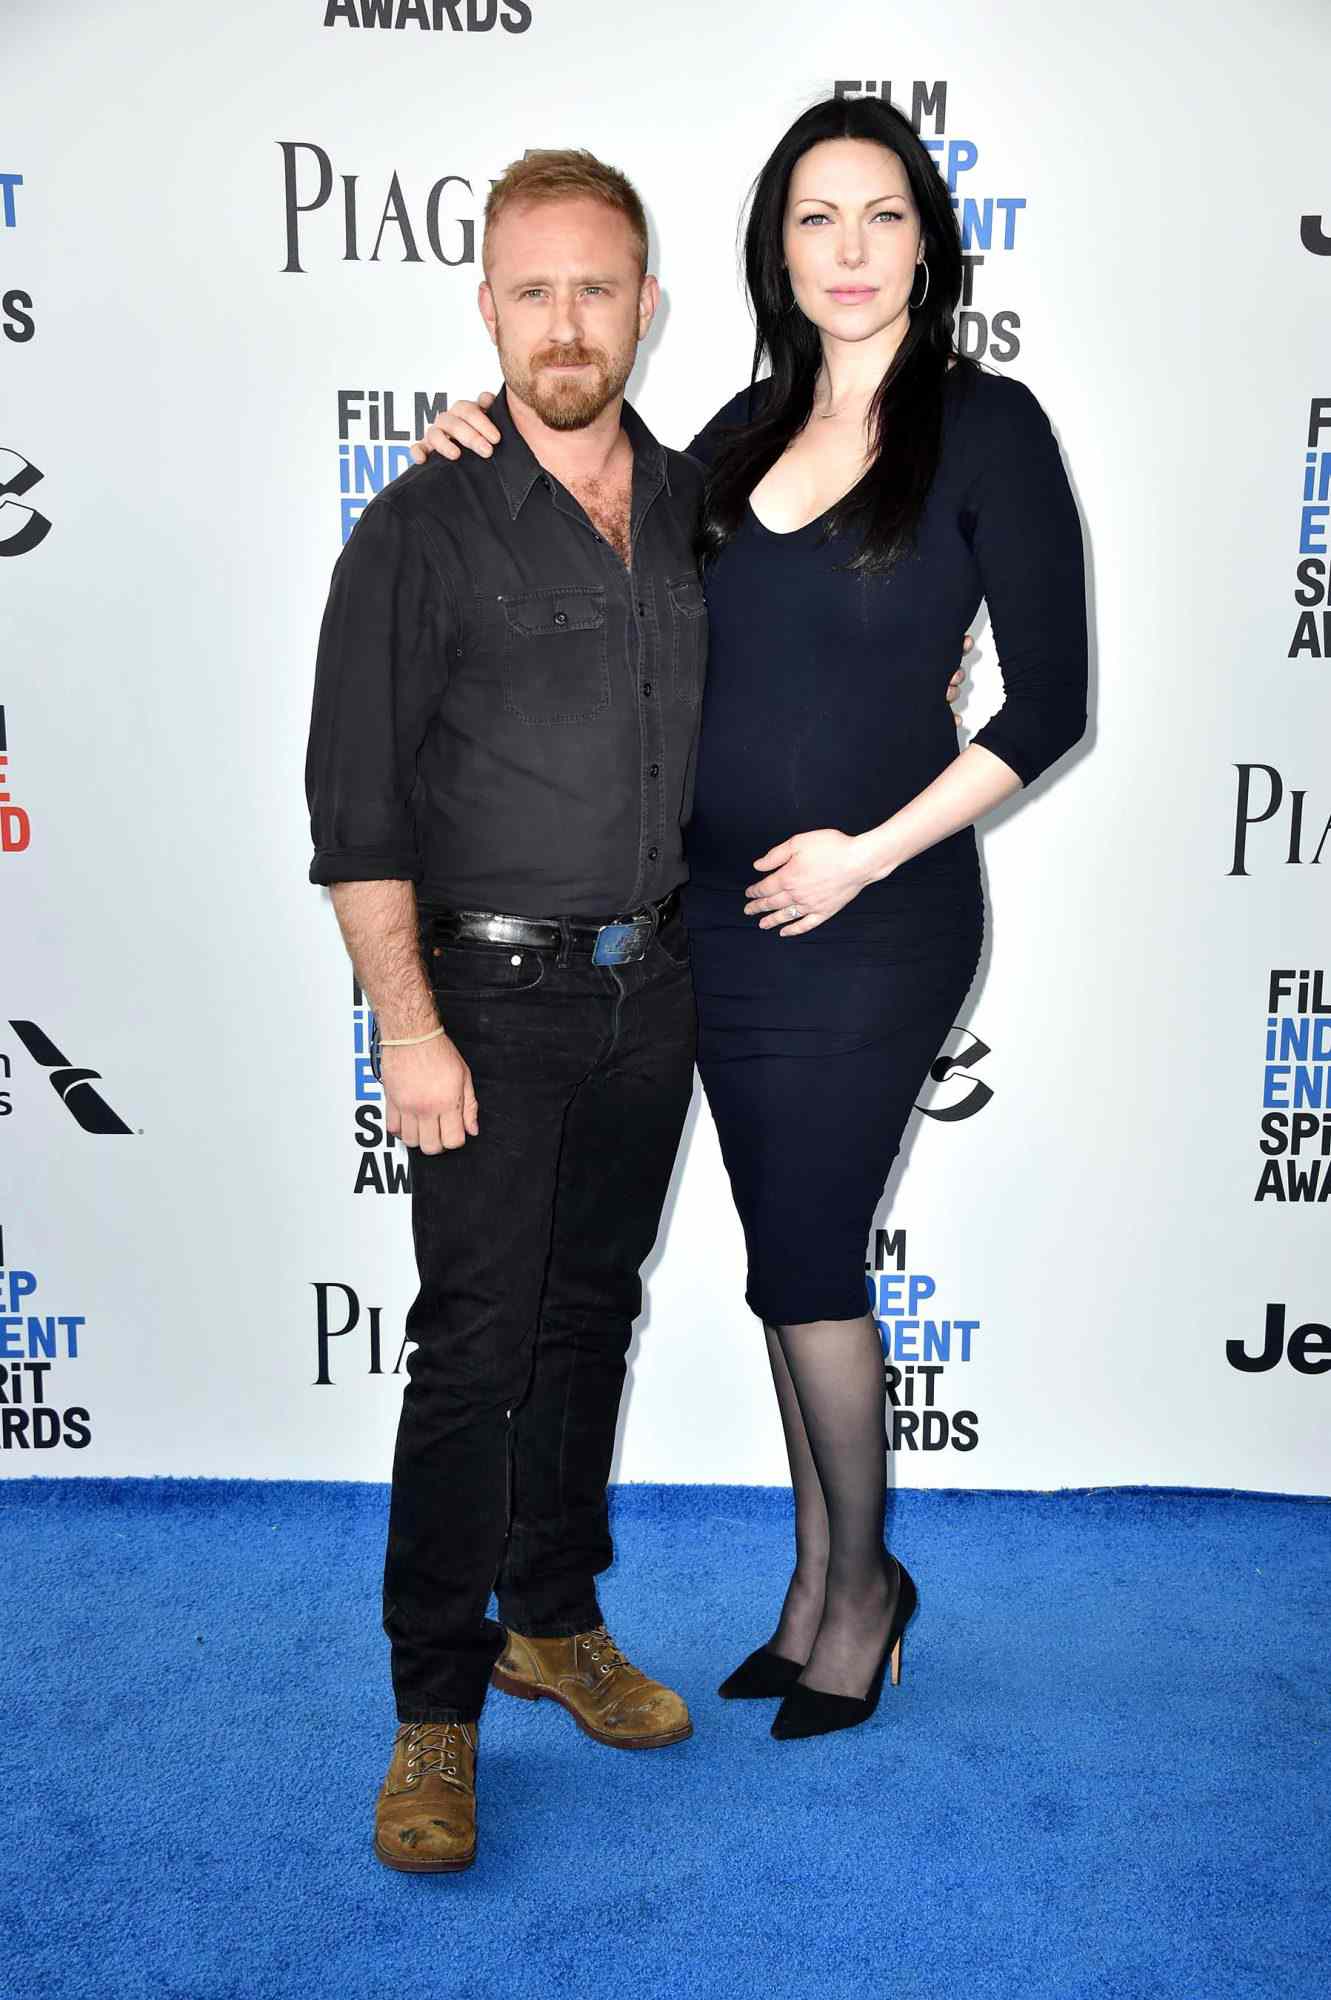 Hell or High Water&nbsp;actor Ben Foster and&nbsp;Orange Is the New Black&nbsp;actress Laura Prepon